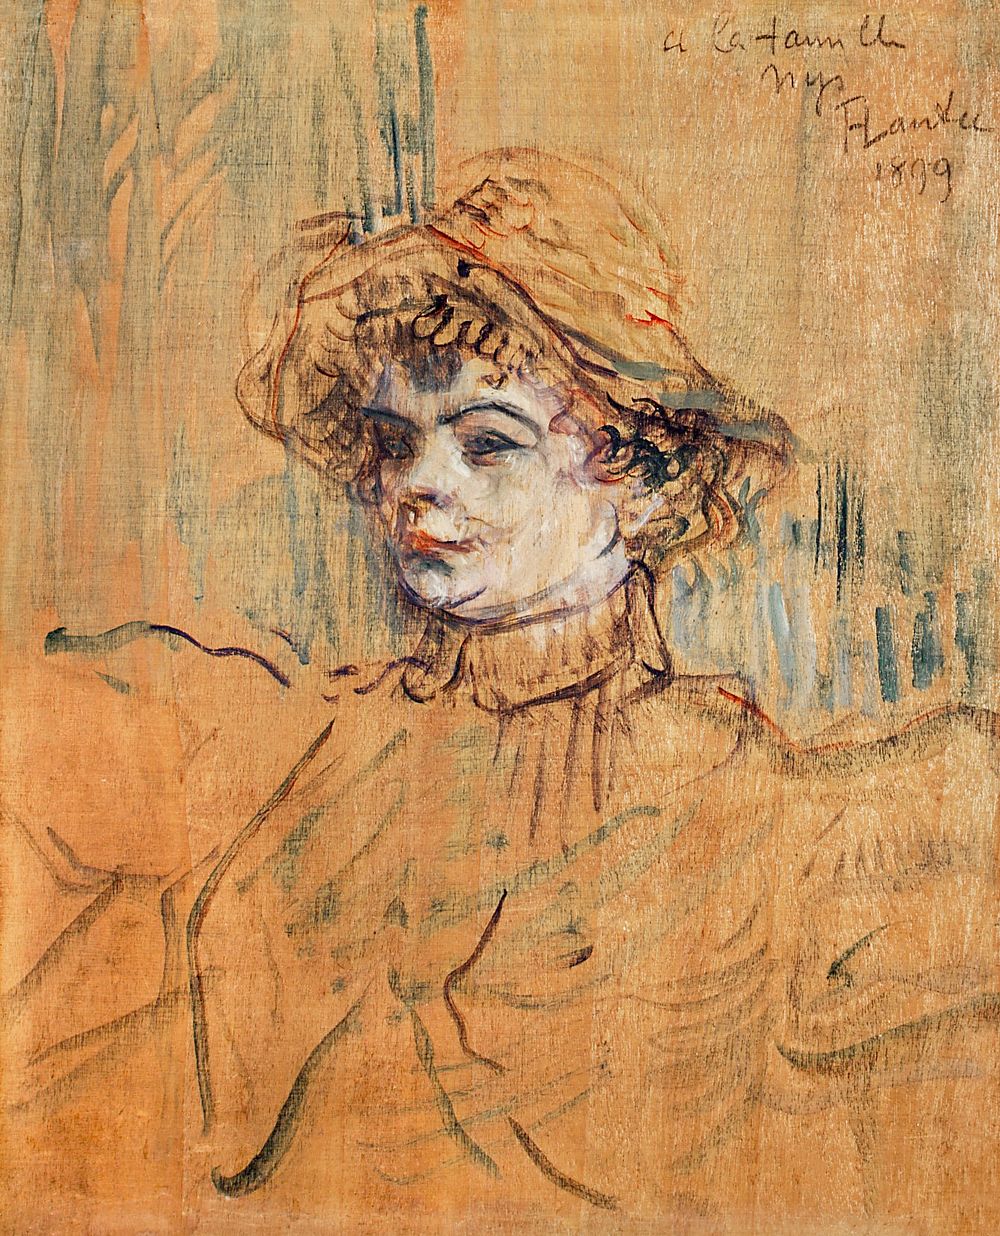 Mademoiselle Nys (1899) painting in high resolution by Henri de Toulouse&ndash;Lautrec. Original from The MET Museum.…